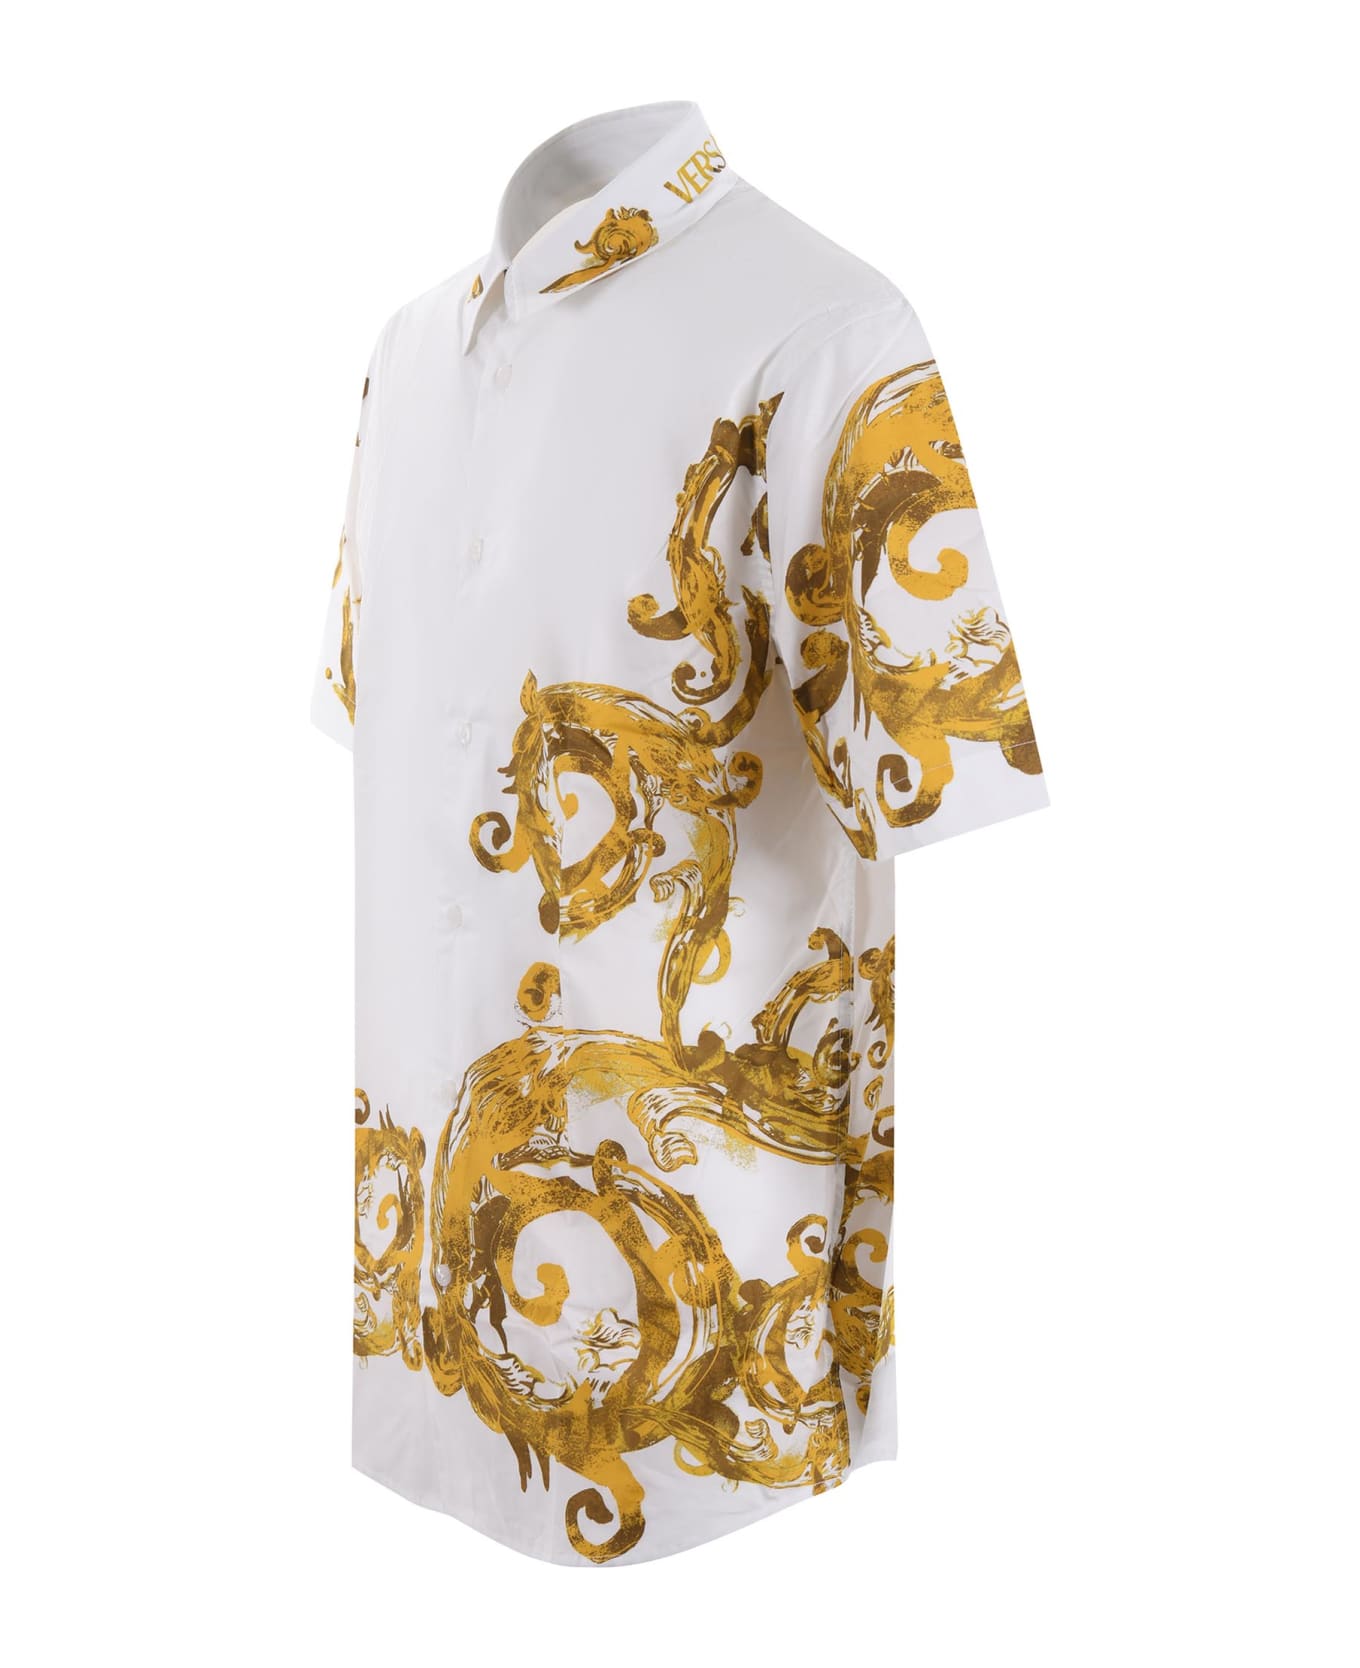 Versace Jeans Couture Shirt - Bianco/oro